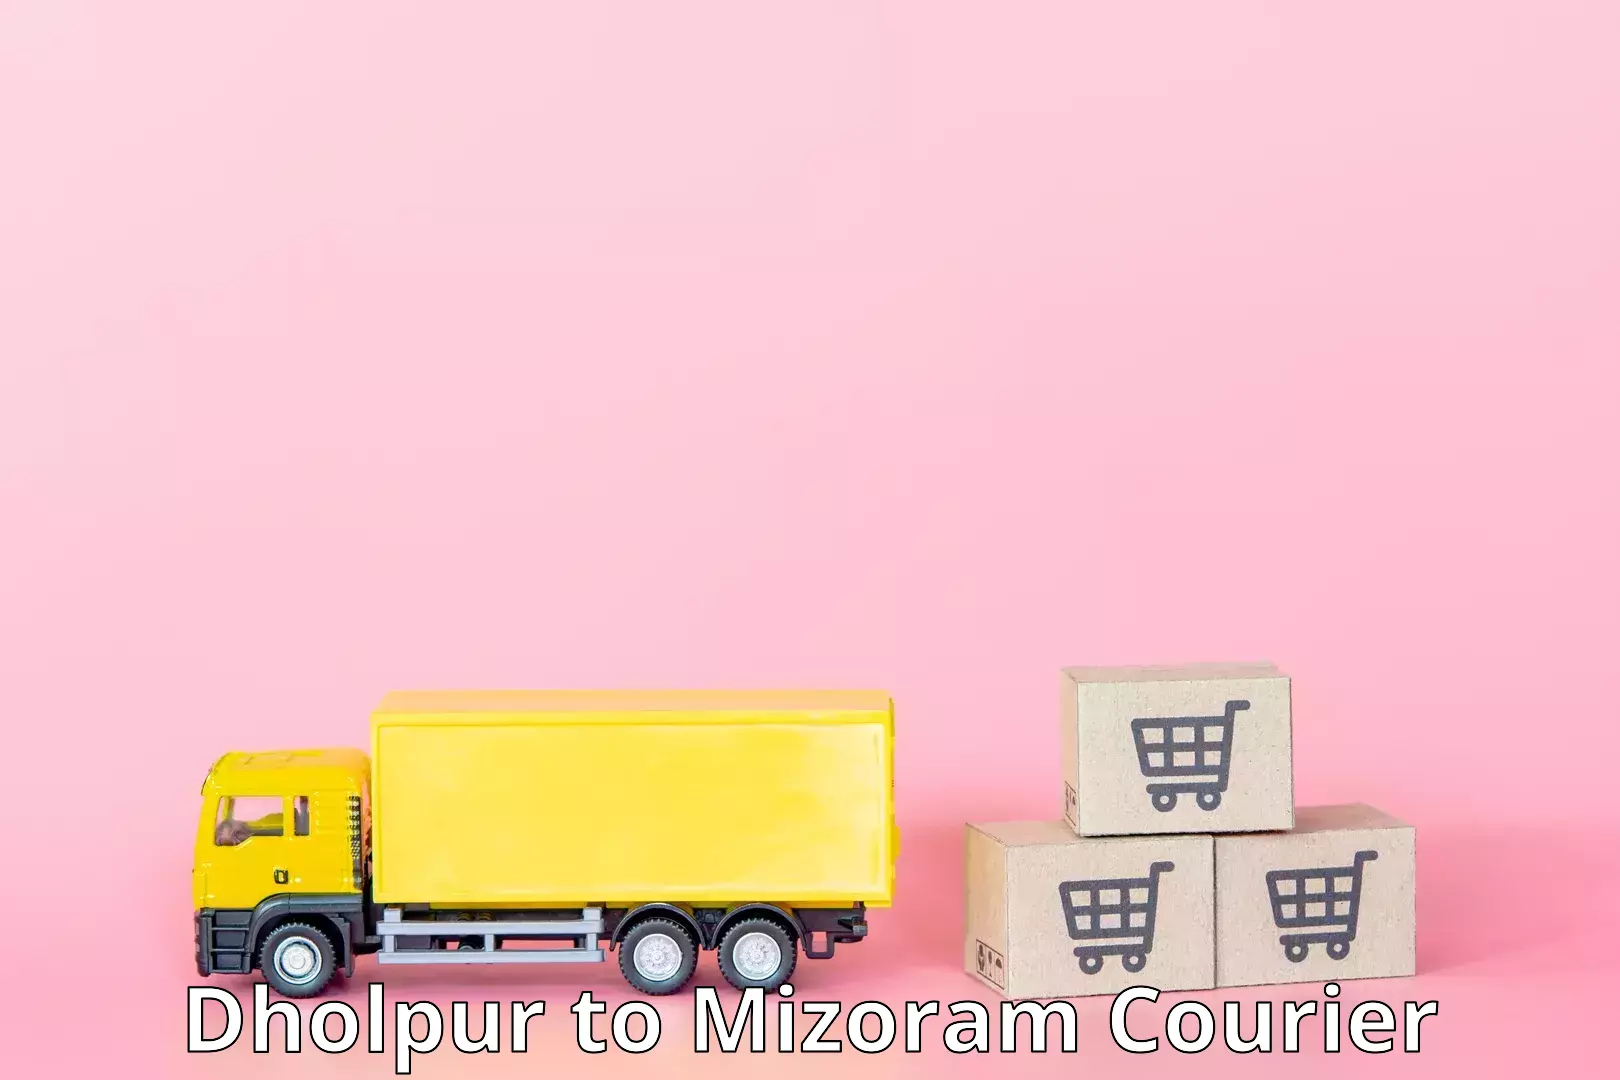 Global parcel delivery Dholpur to Mizoram